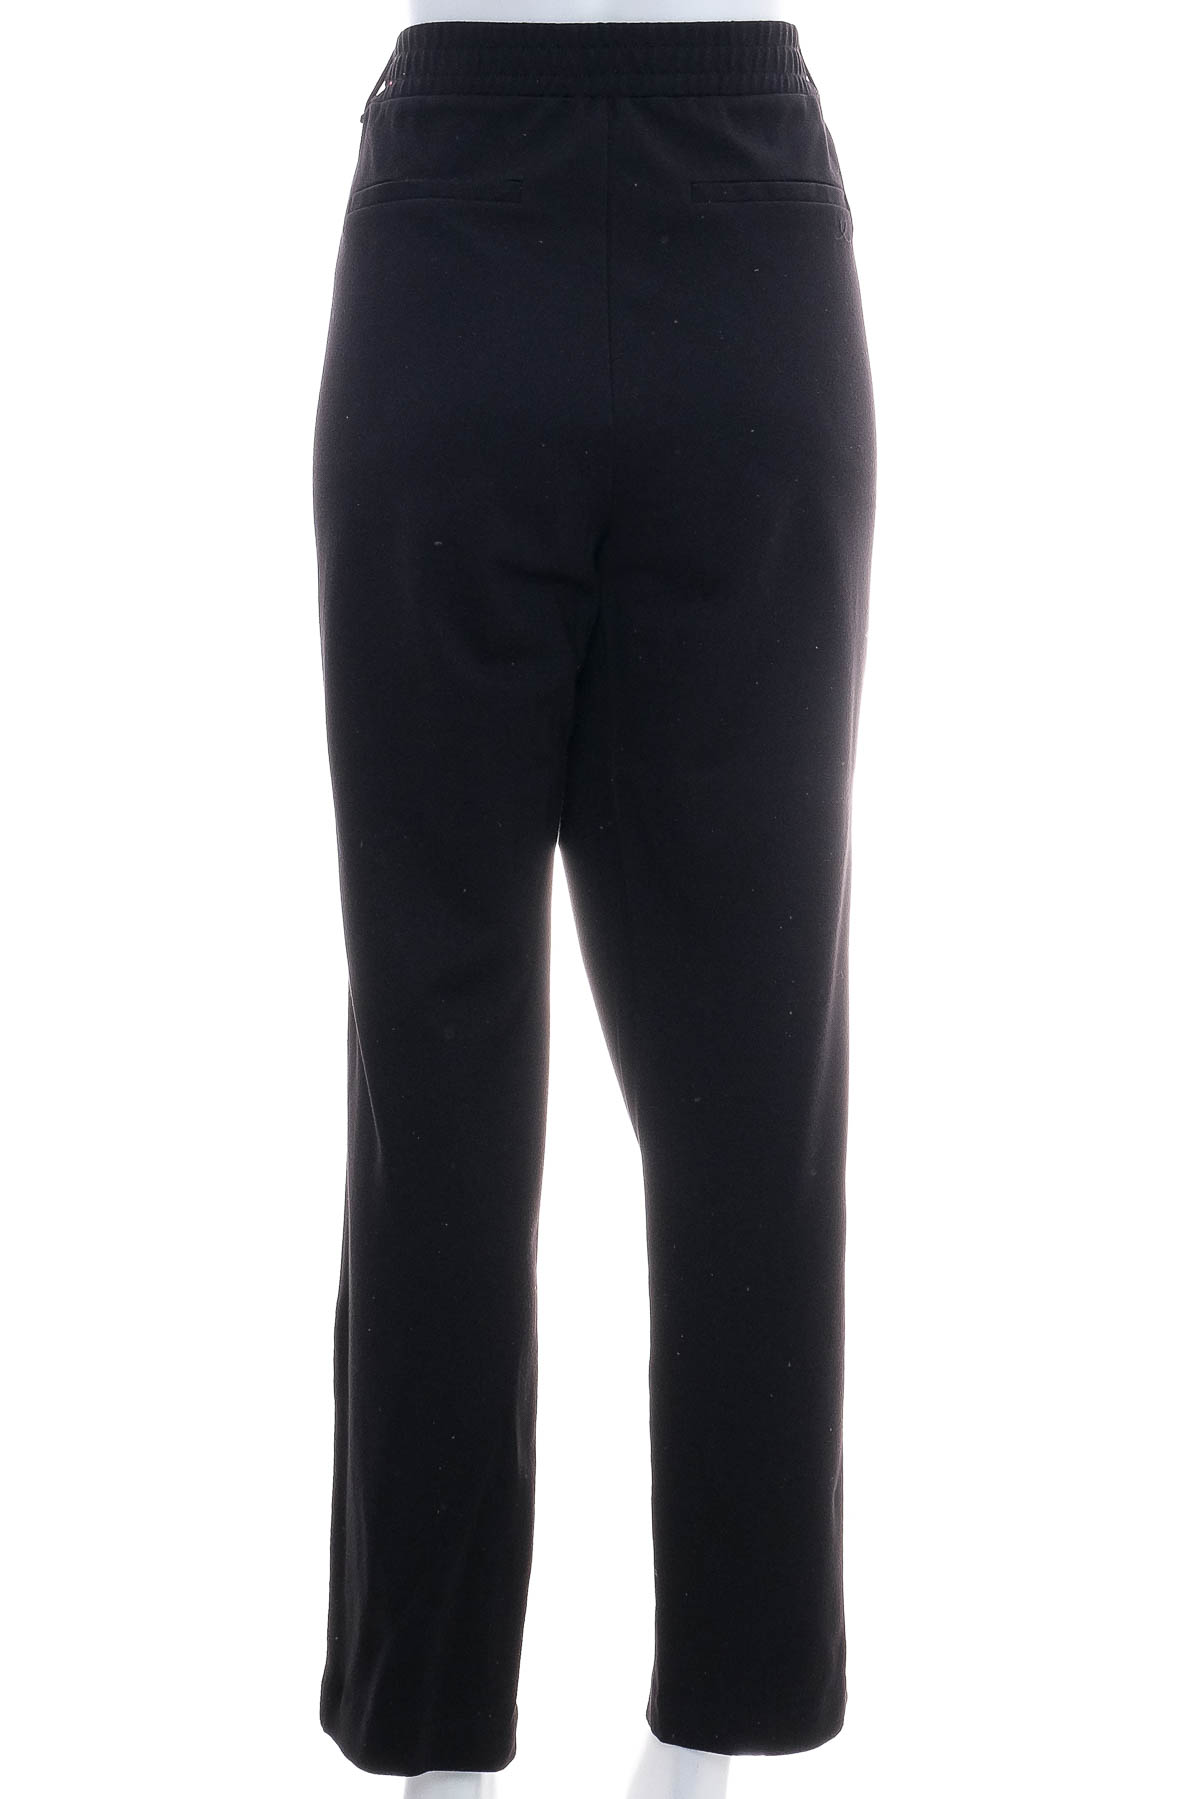 Women's trousers - S.Oliver - 1